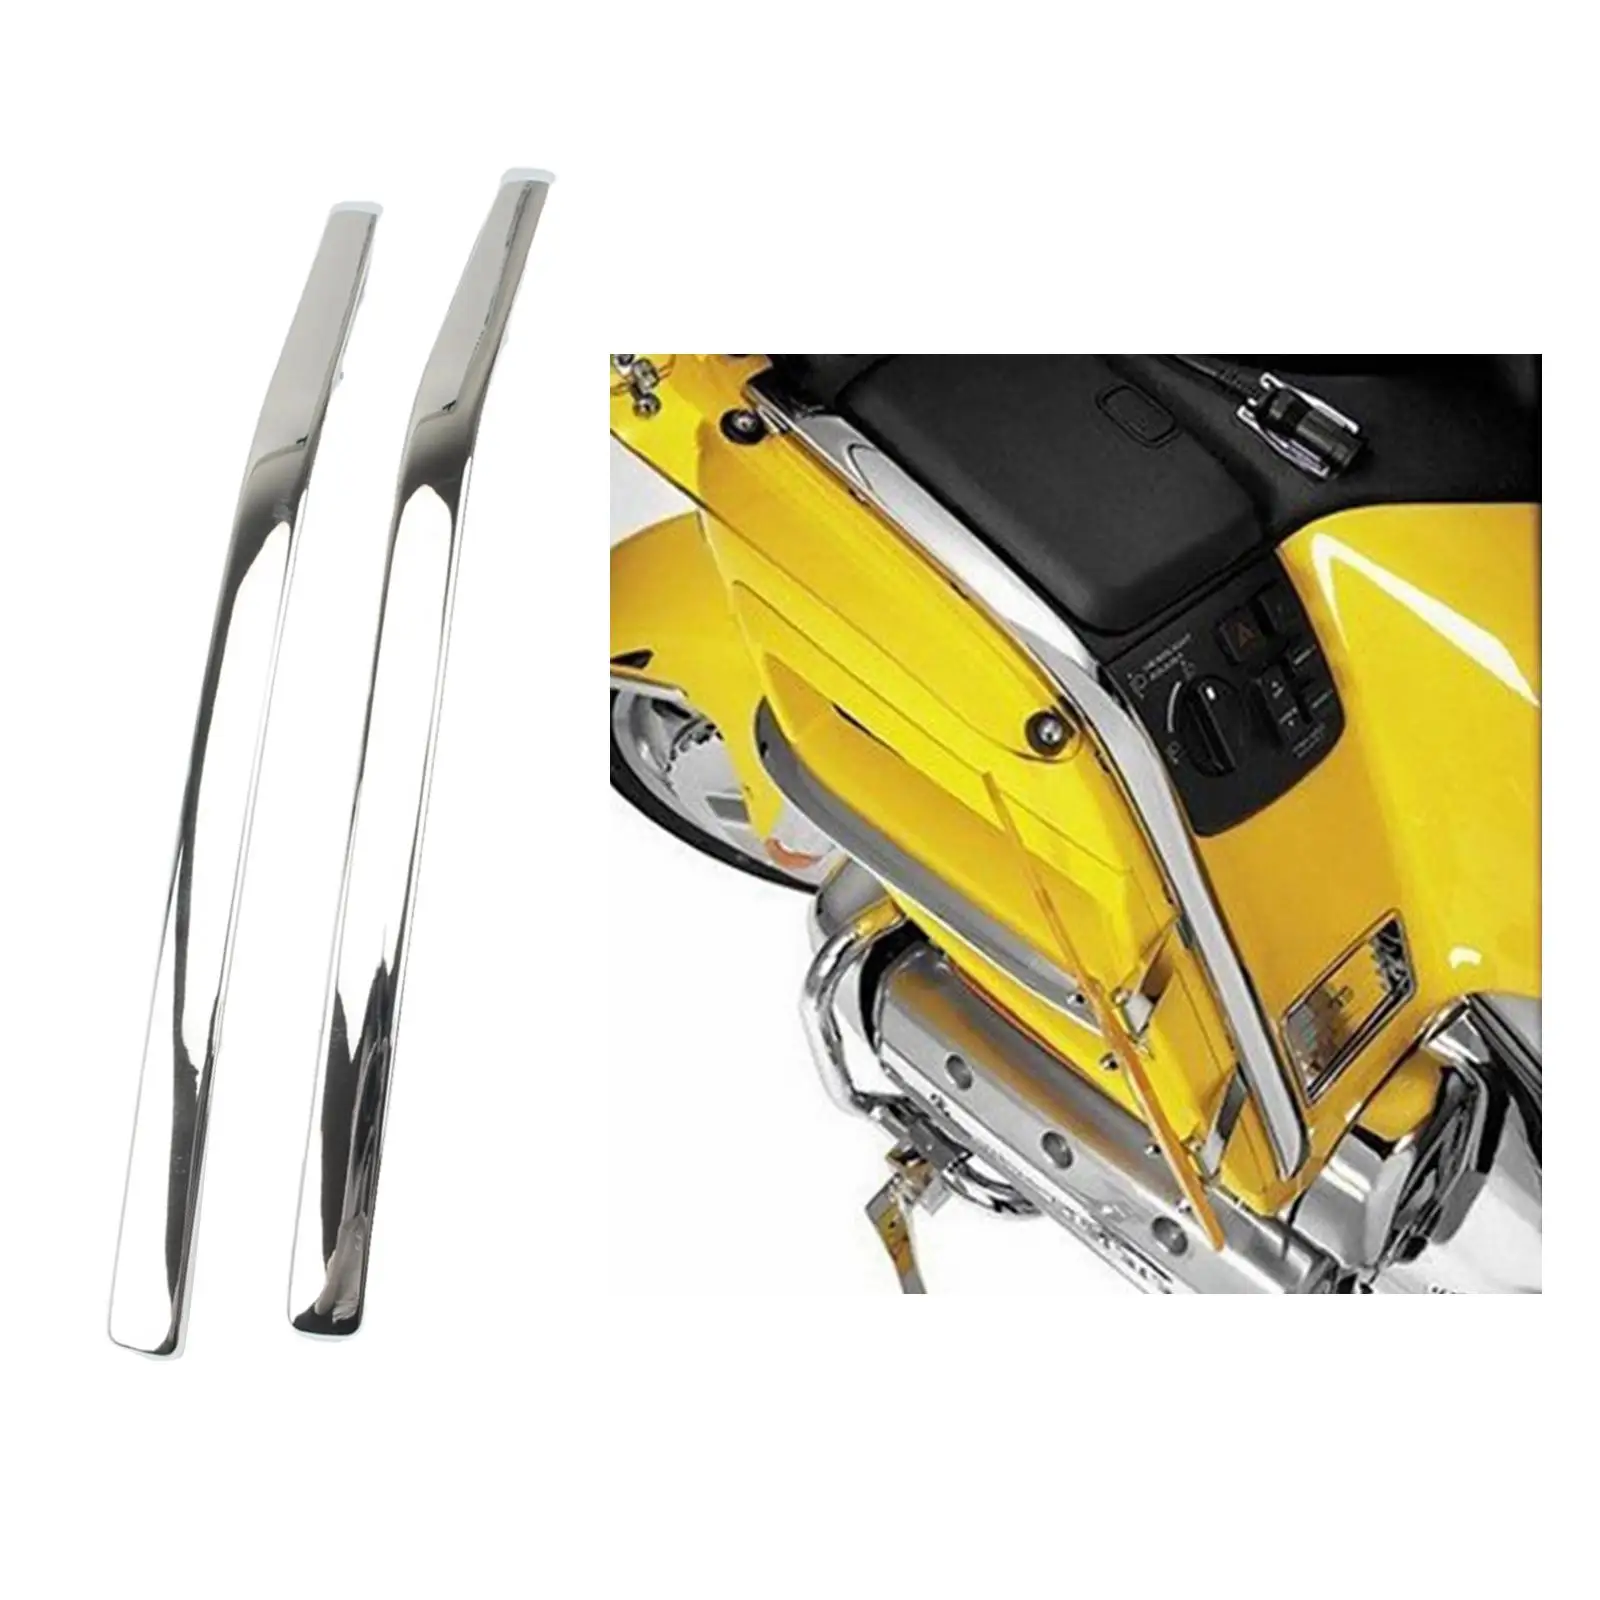 2pcs Motorcycles Connecting Fairing Strake for GoldWing GL1800 01-11